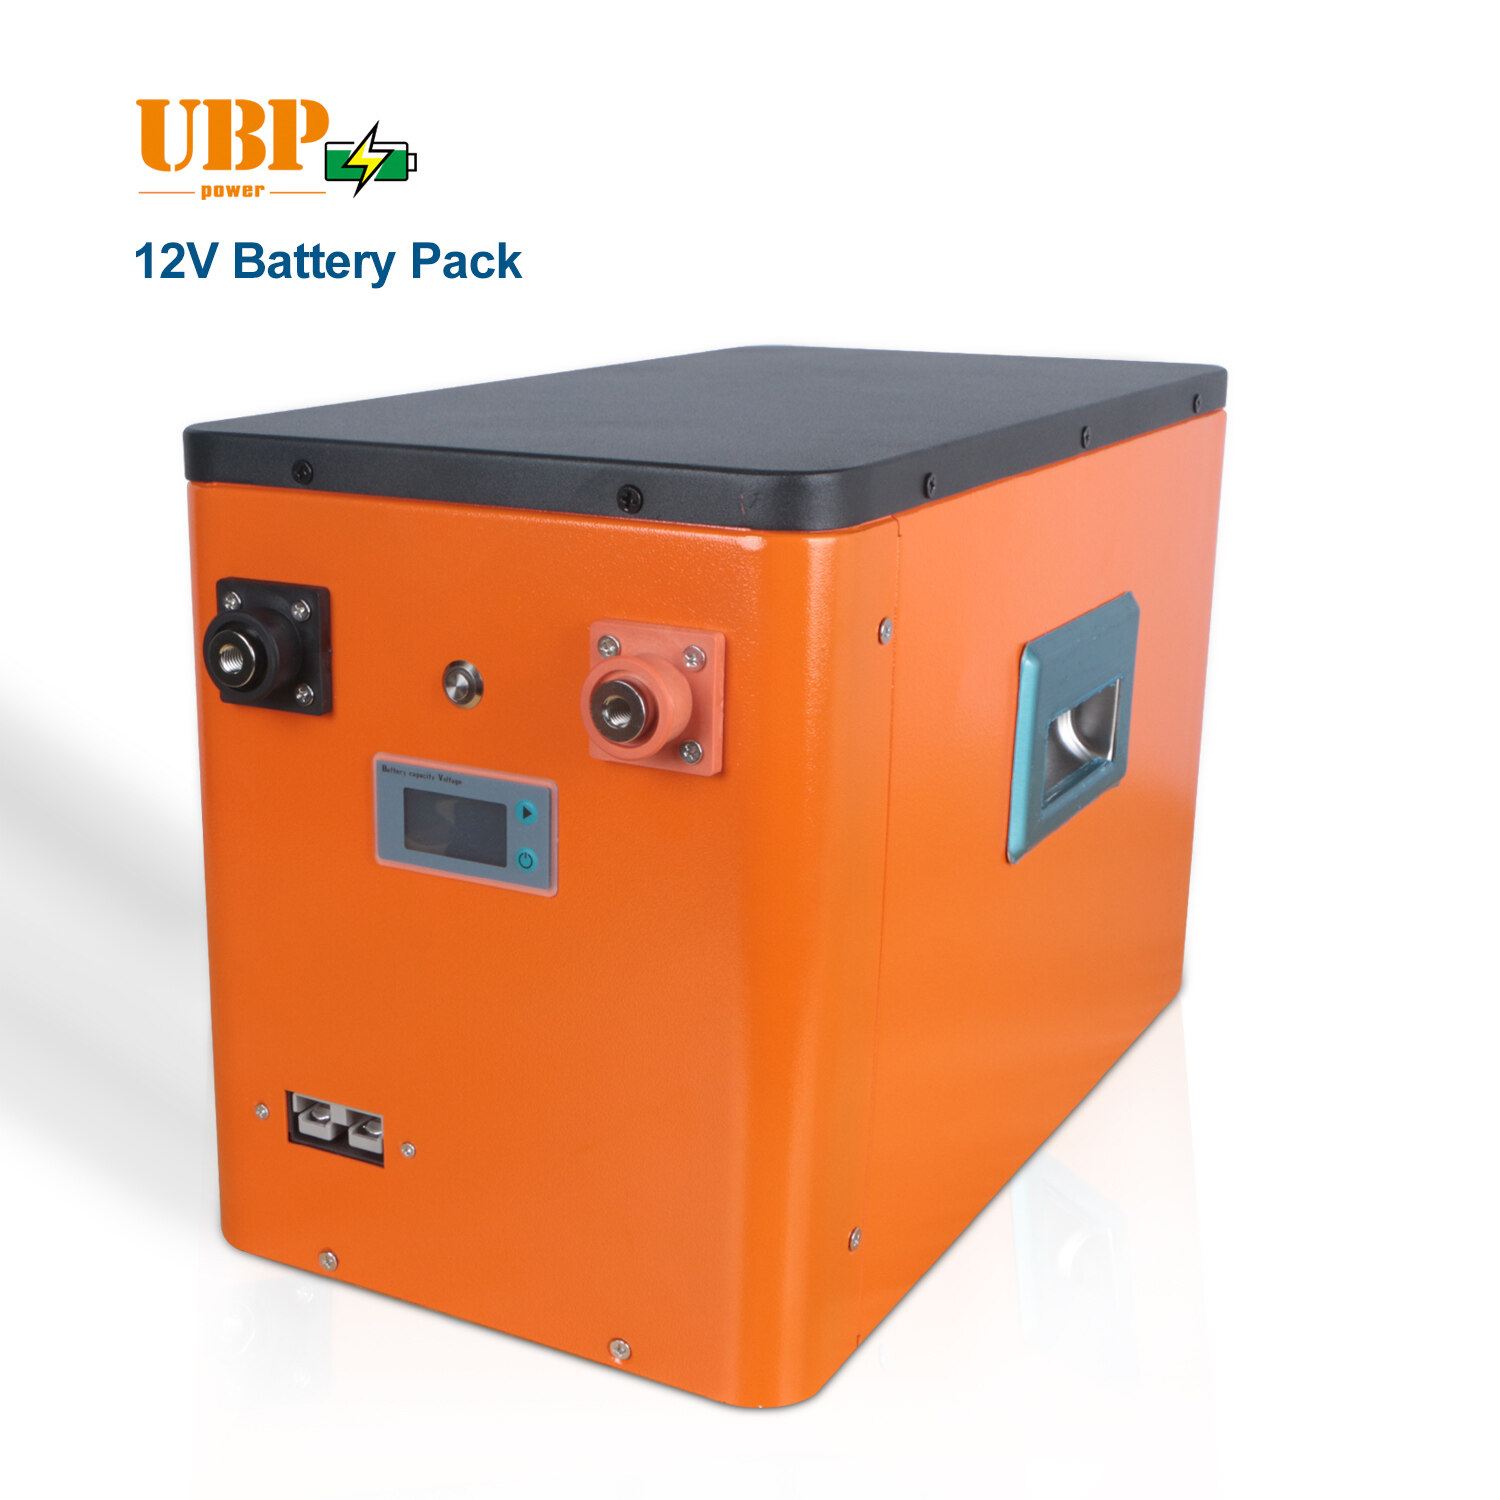 UBPPOWER 12V 200Ah/280Ah LiFePo4 Battery Pack 2.4Kwh~3.5Kwh Energy Support OEM Send Inquiry